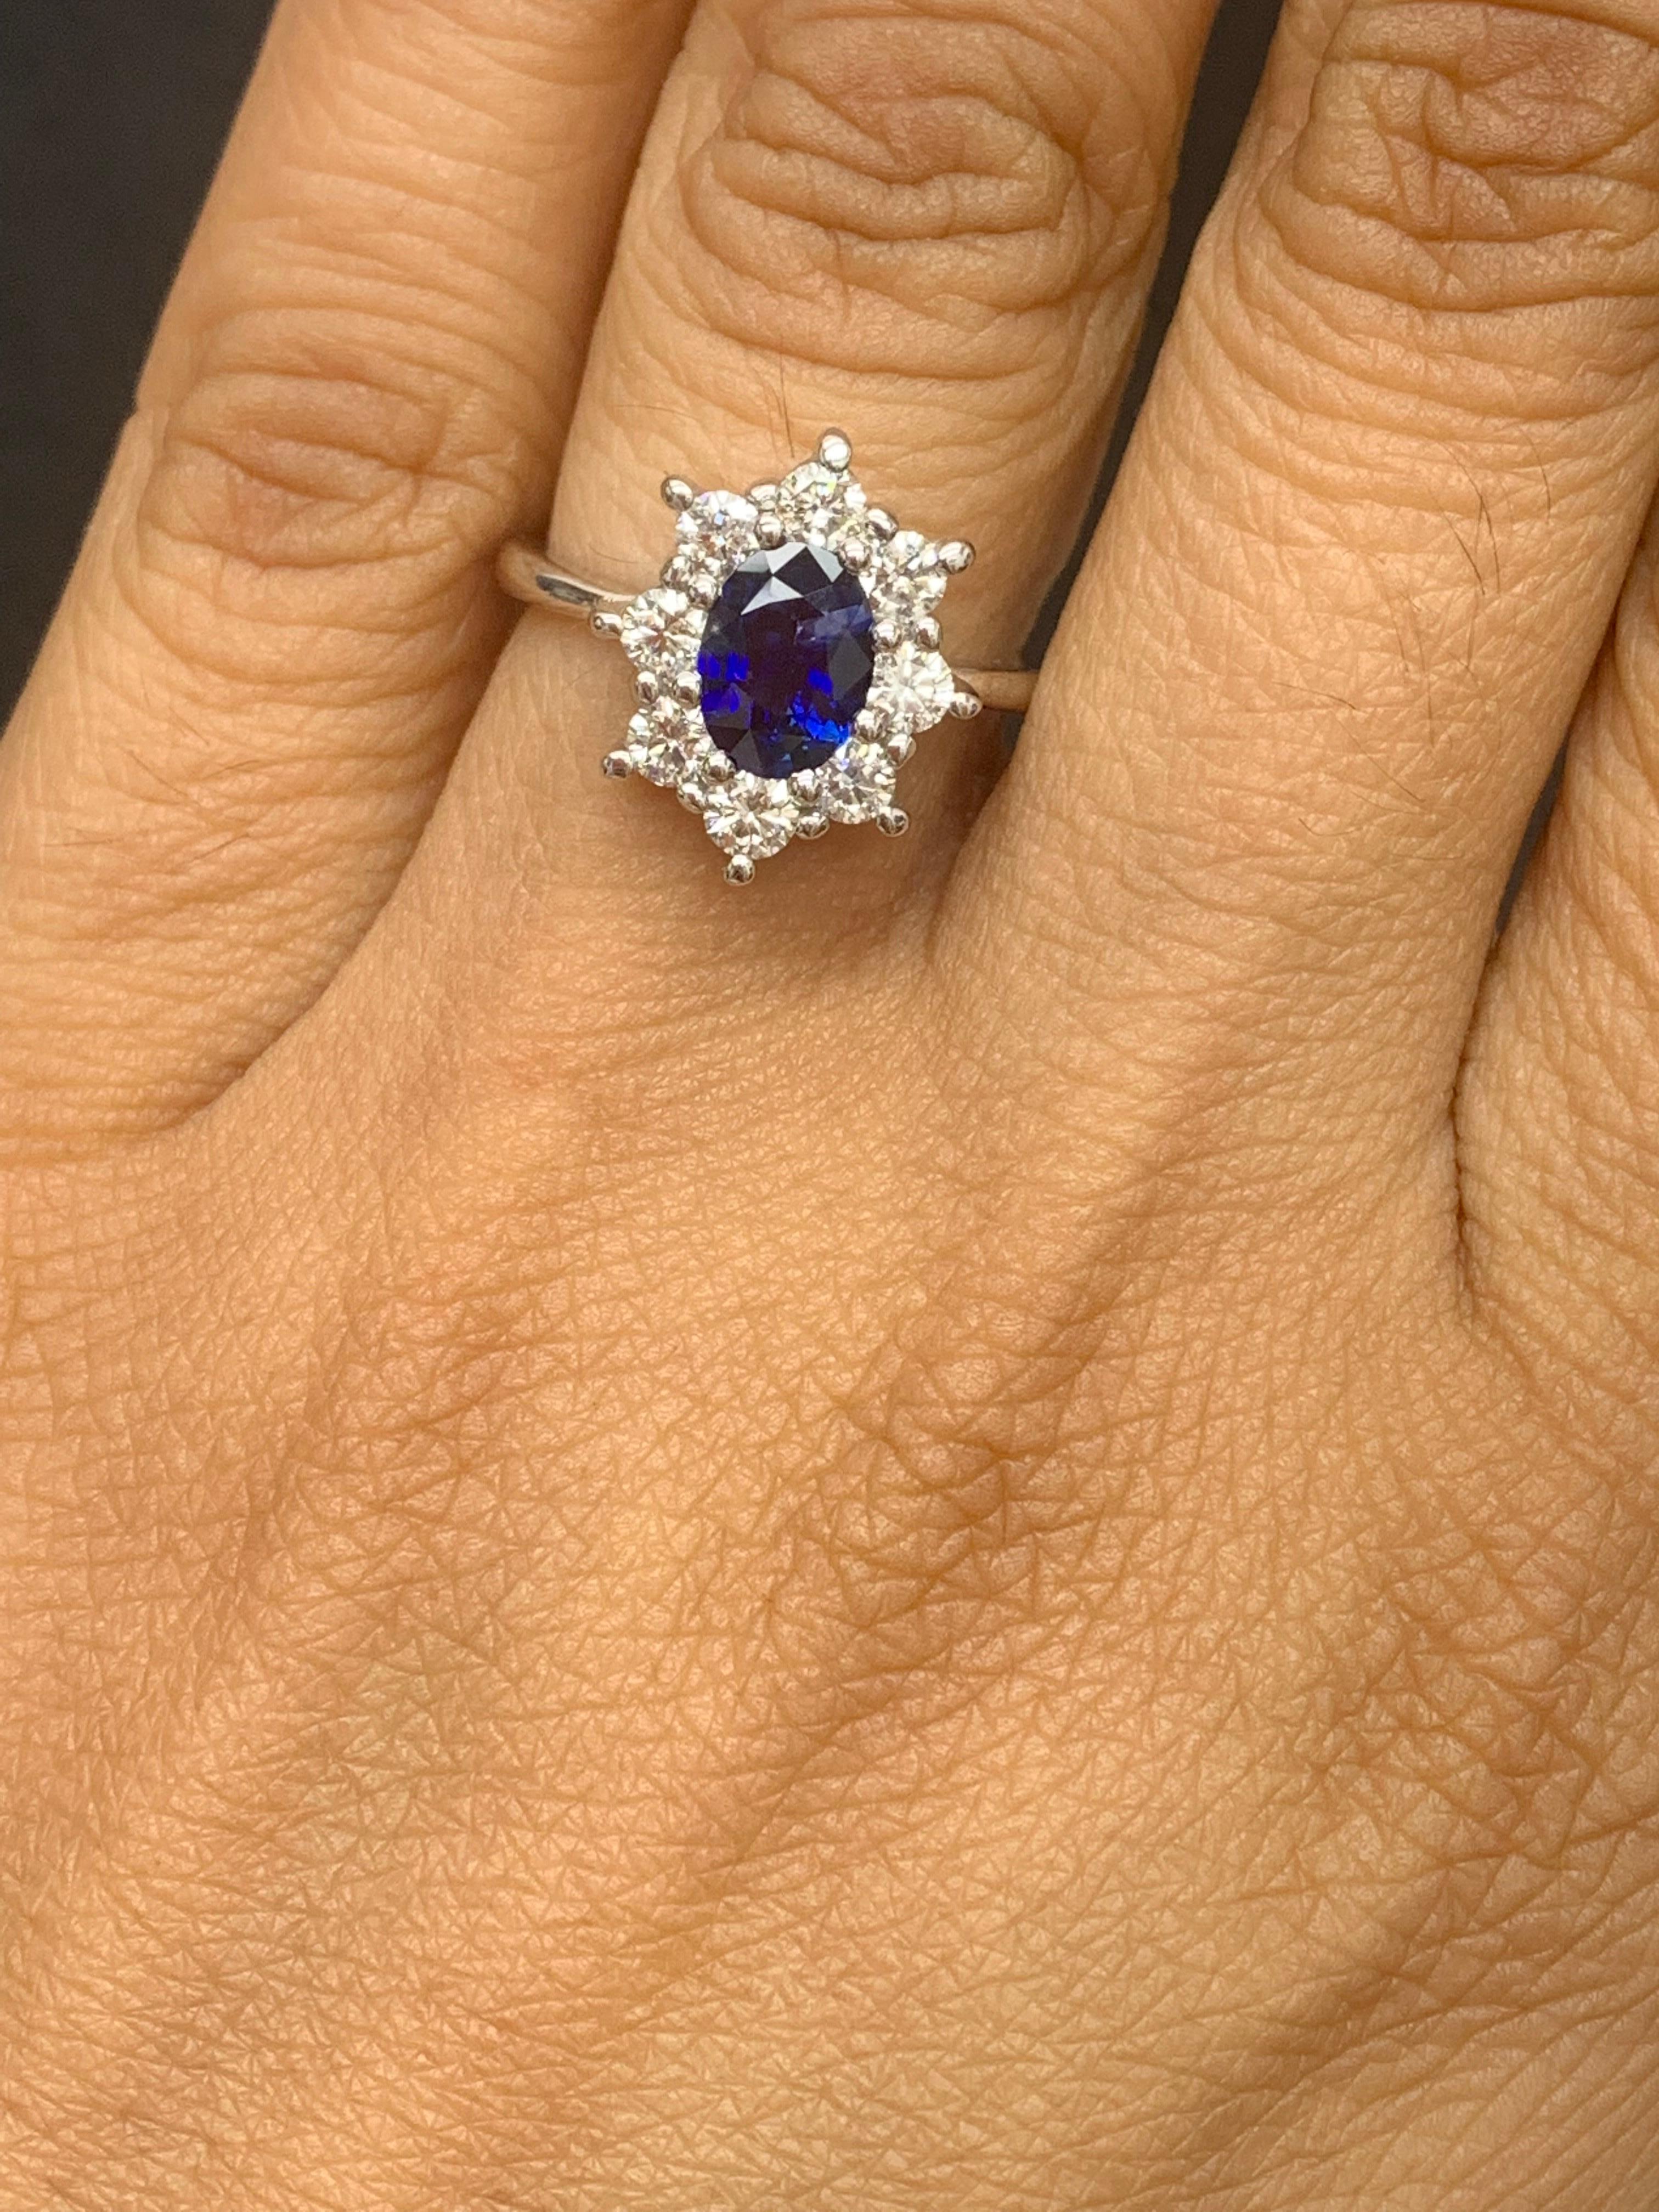 1.55 Carat Oval Cut Blue Sapphire and Diamond Ring in 14k White Gold For Sale 2